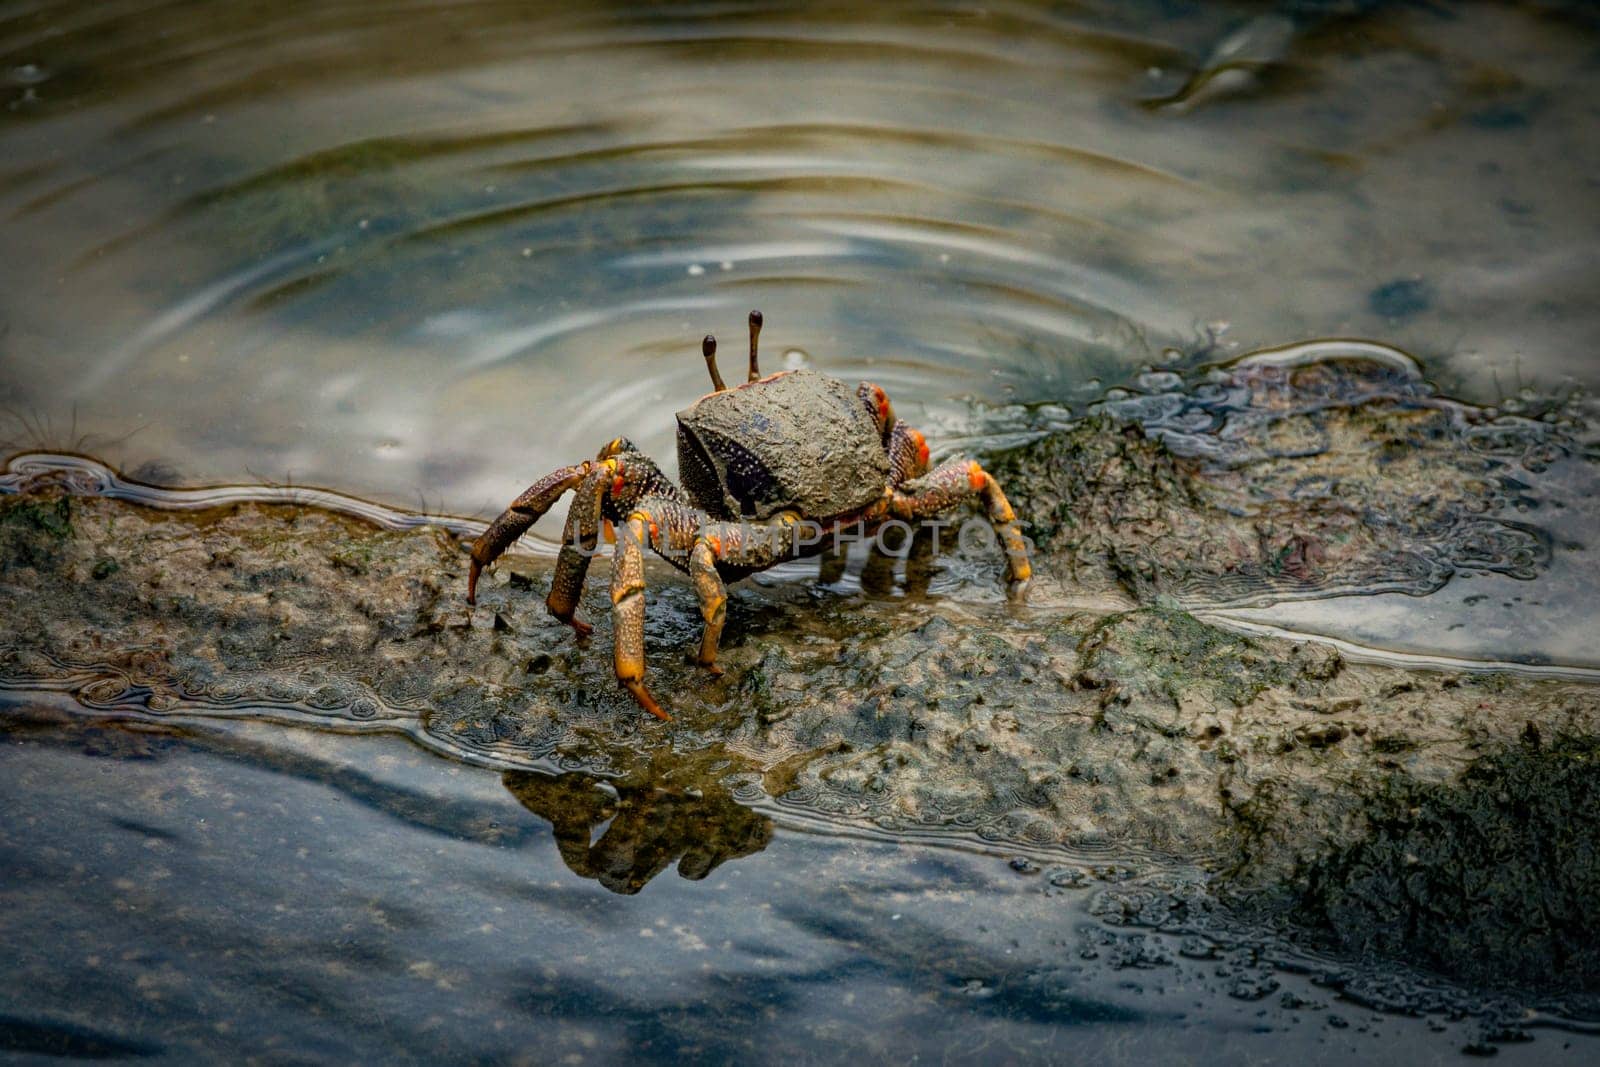 male fiddler crab in the mud with huge claw by compuinfoto